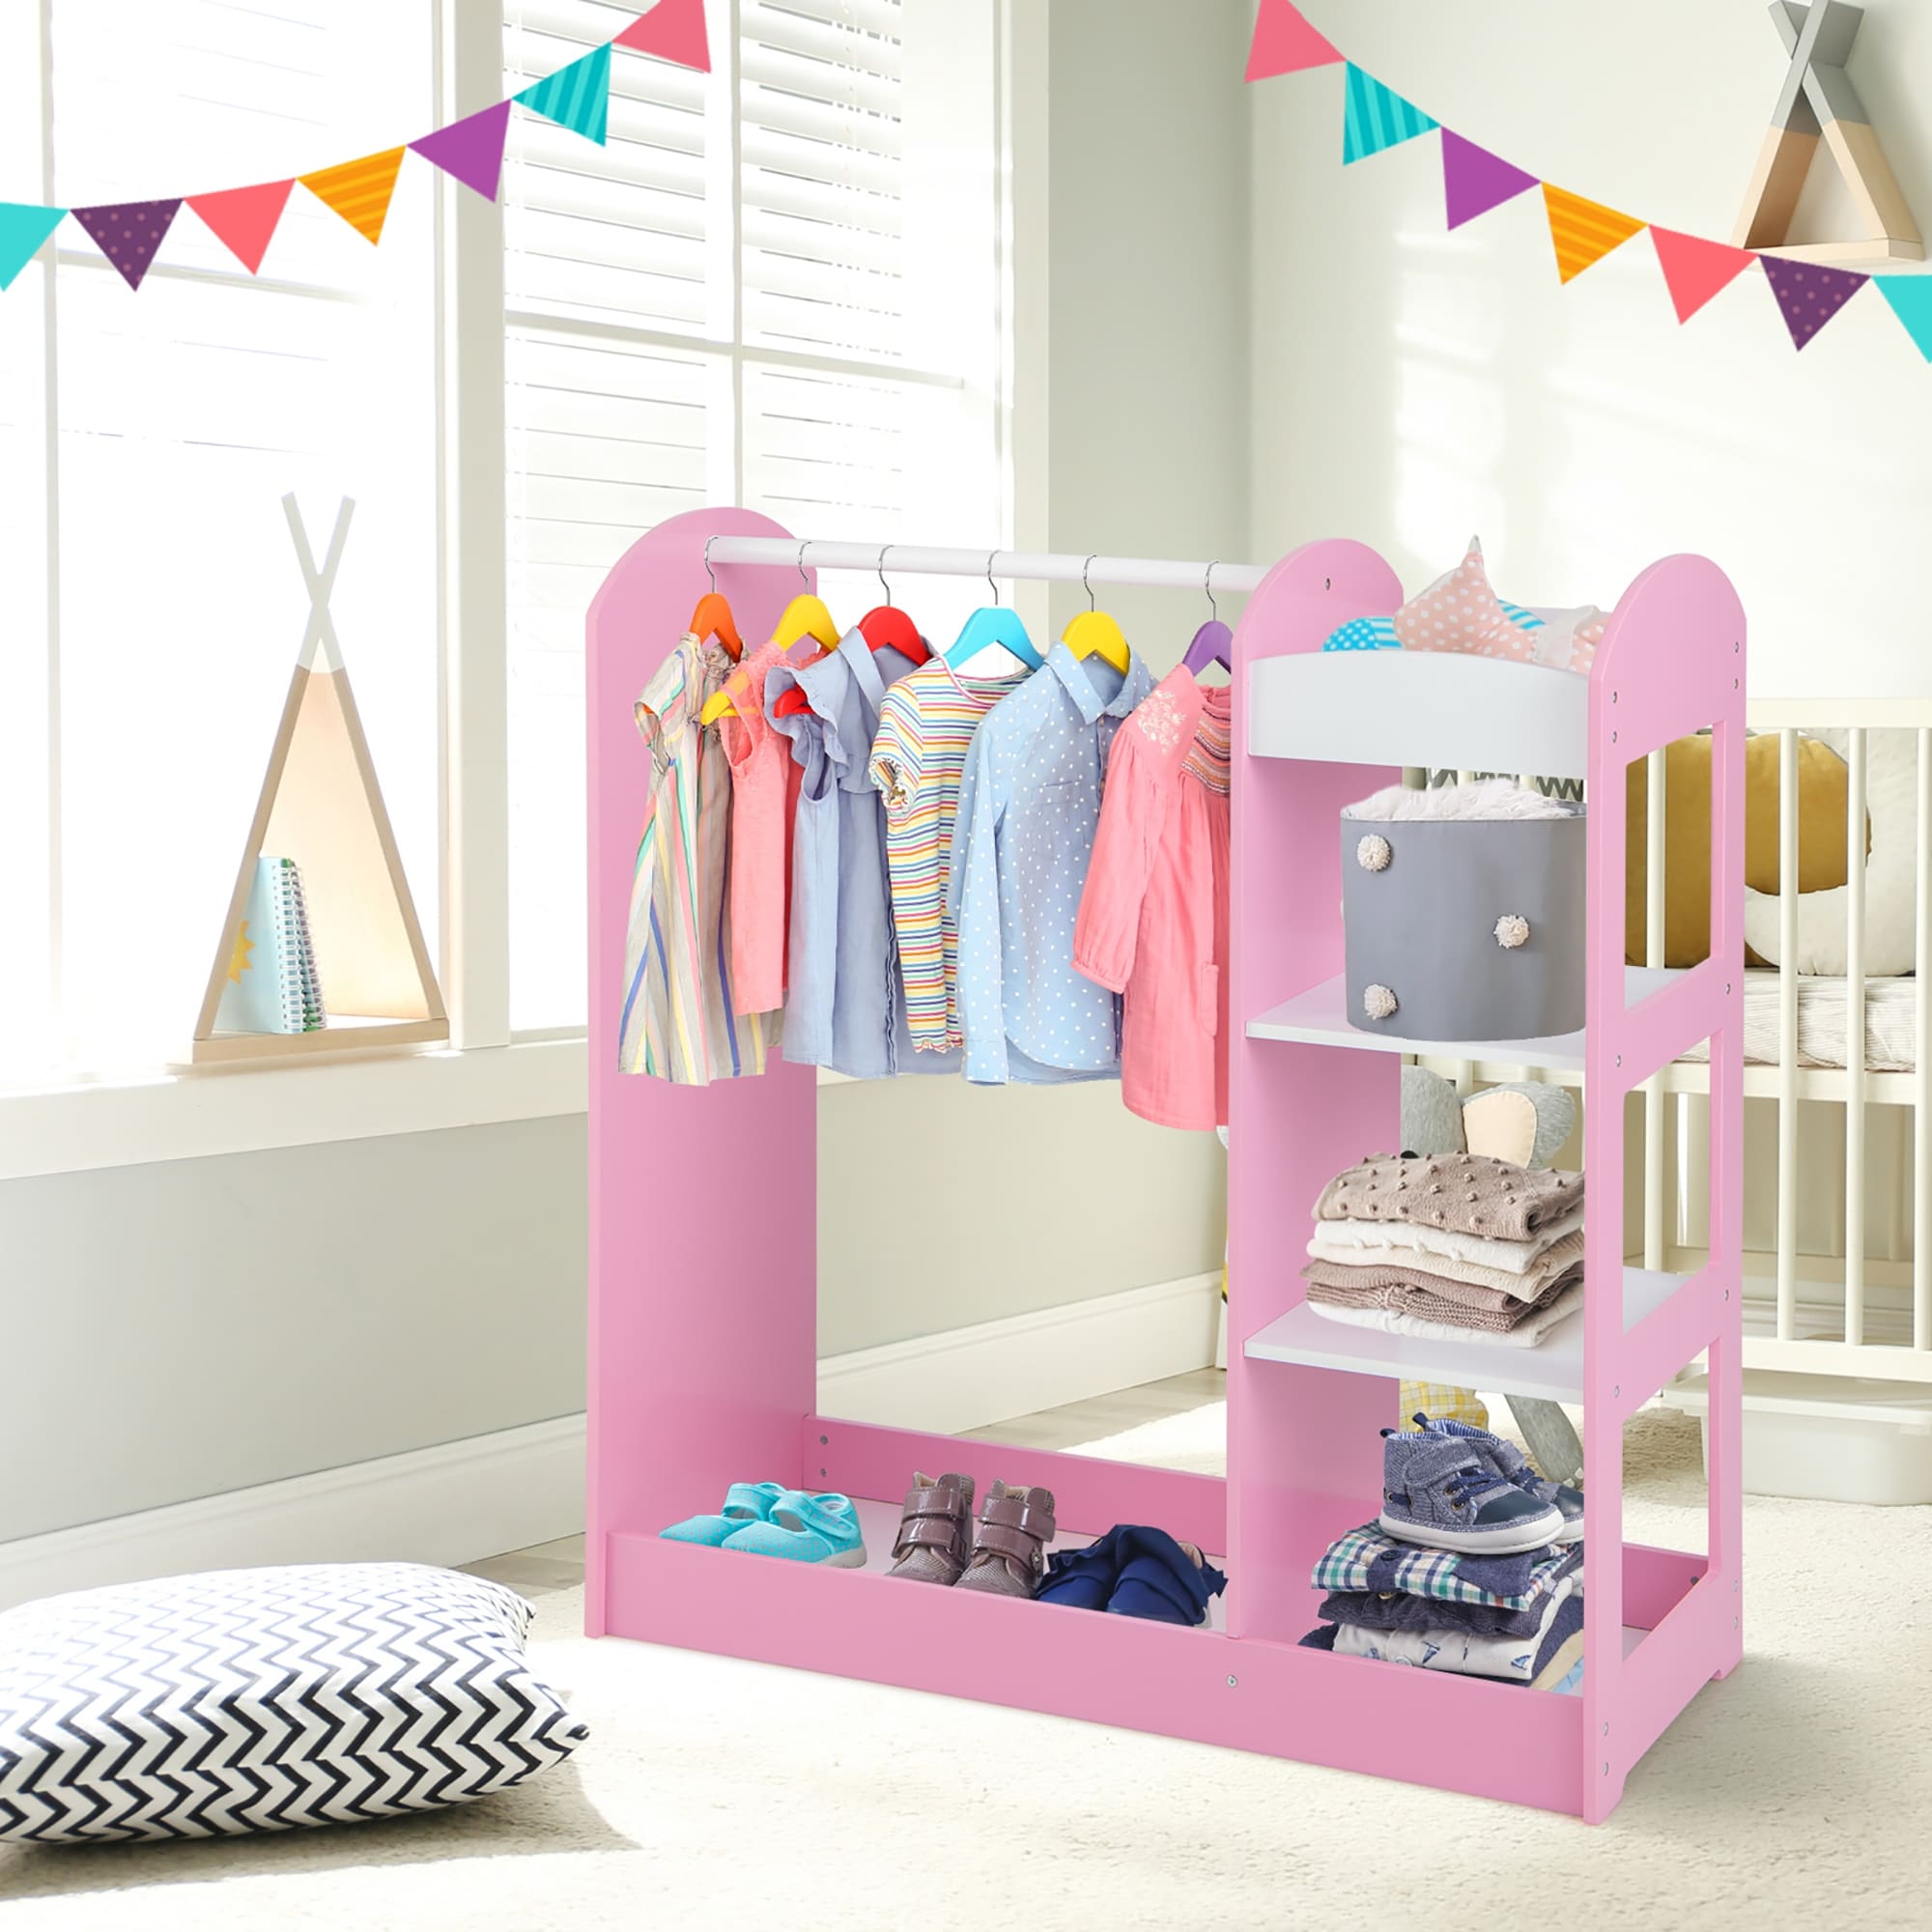 https://ak1.ostkcdn.com/images/products/is/images/direct/e6c38394ff521d9b3c0ada9271de1618a2c8fe05/Kids-Hanging-Armoire-Dresser-Dress-up-Storage-Closet-with-Mirror.jpg